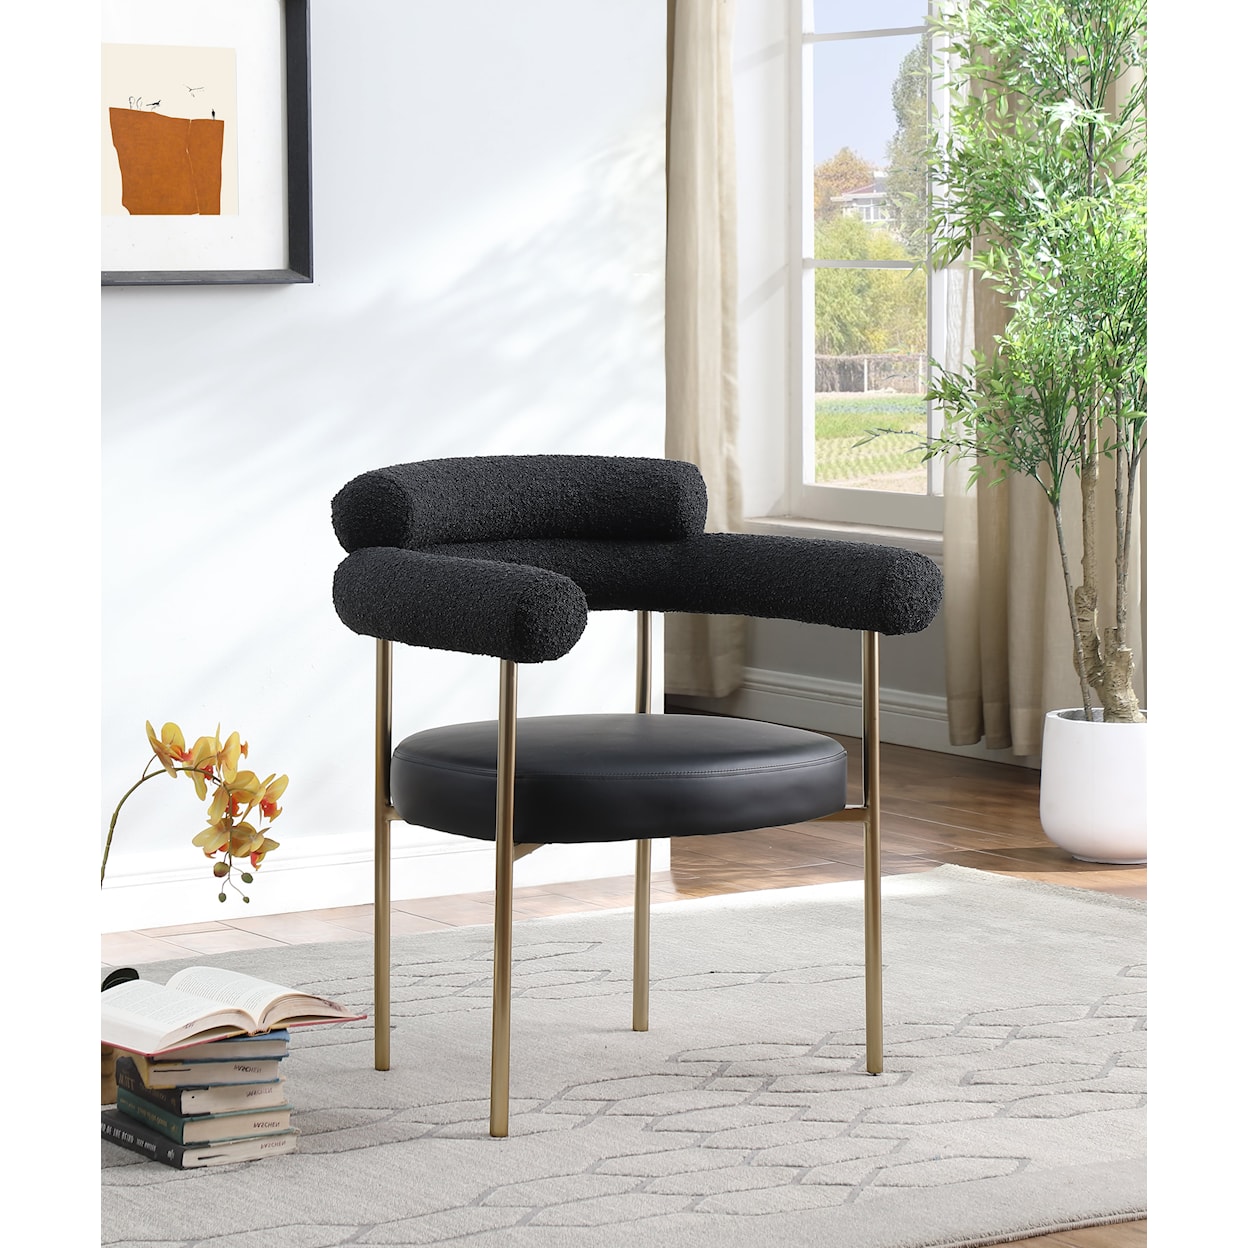 Meridian Furniture Blake Black Fabric and Faux Leather Dining Chair